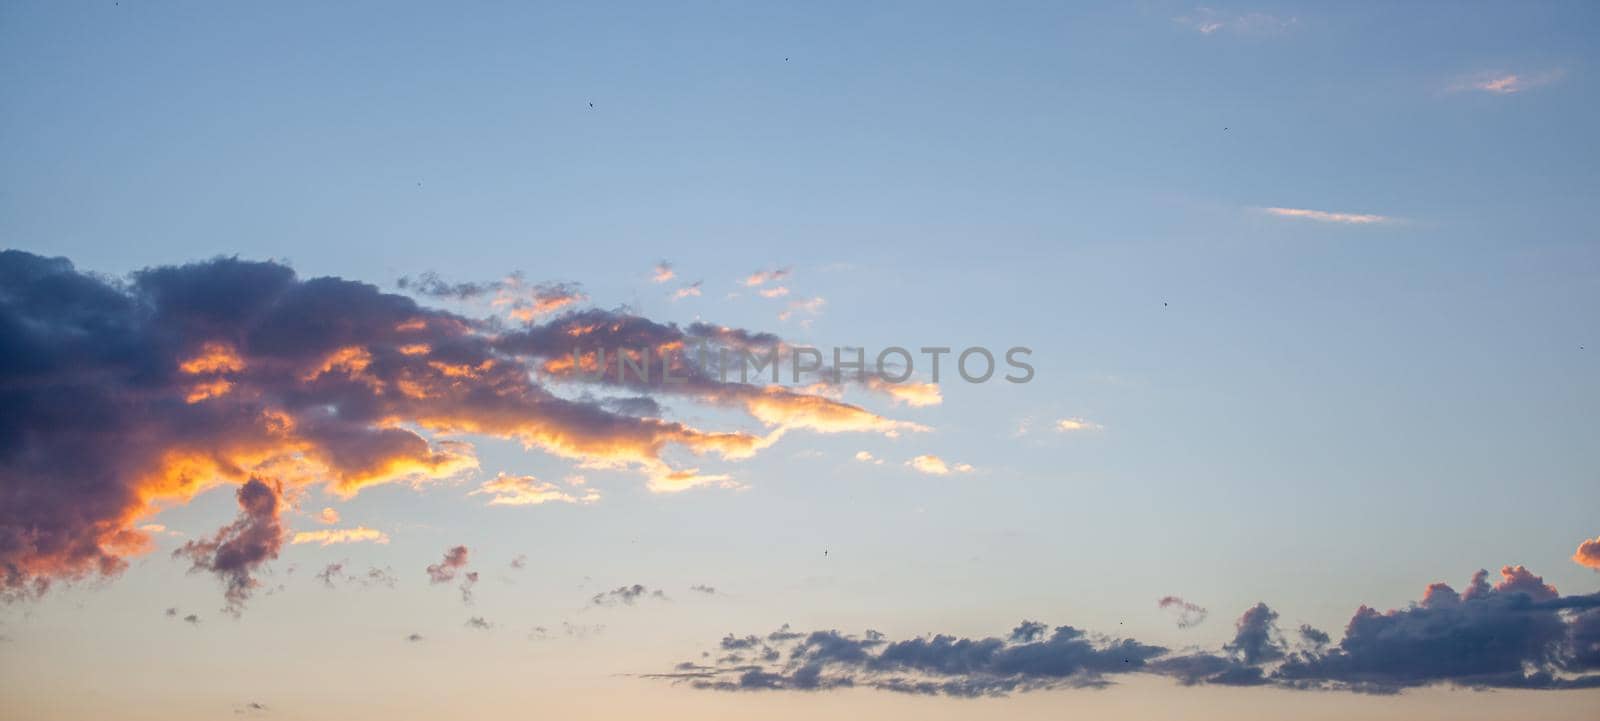 Colorful sunset or sunrise in the sky. The clouds are brightly colored. Beautiful background.